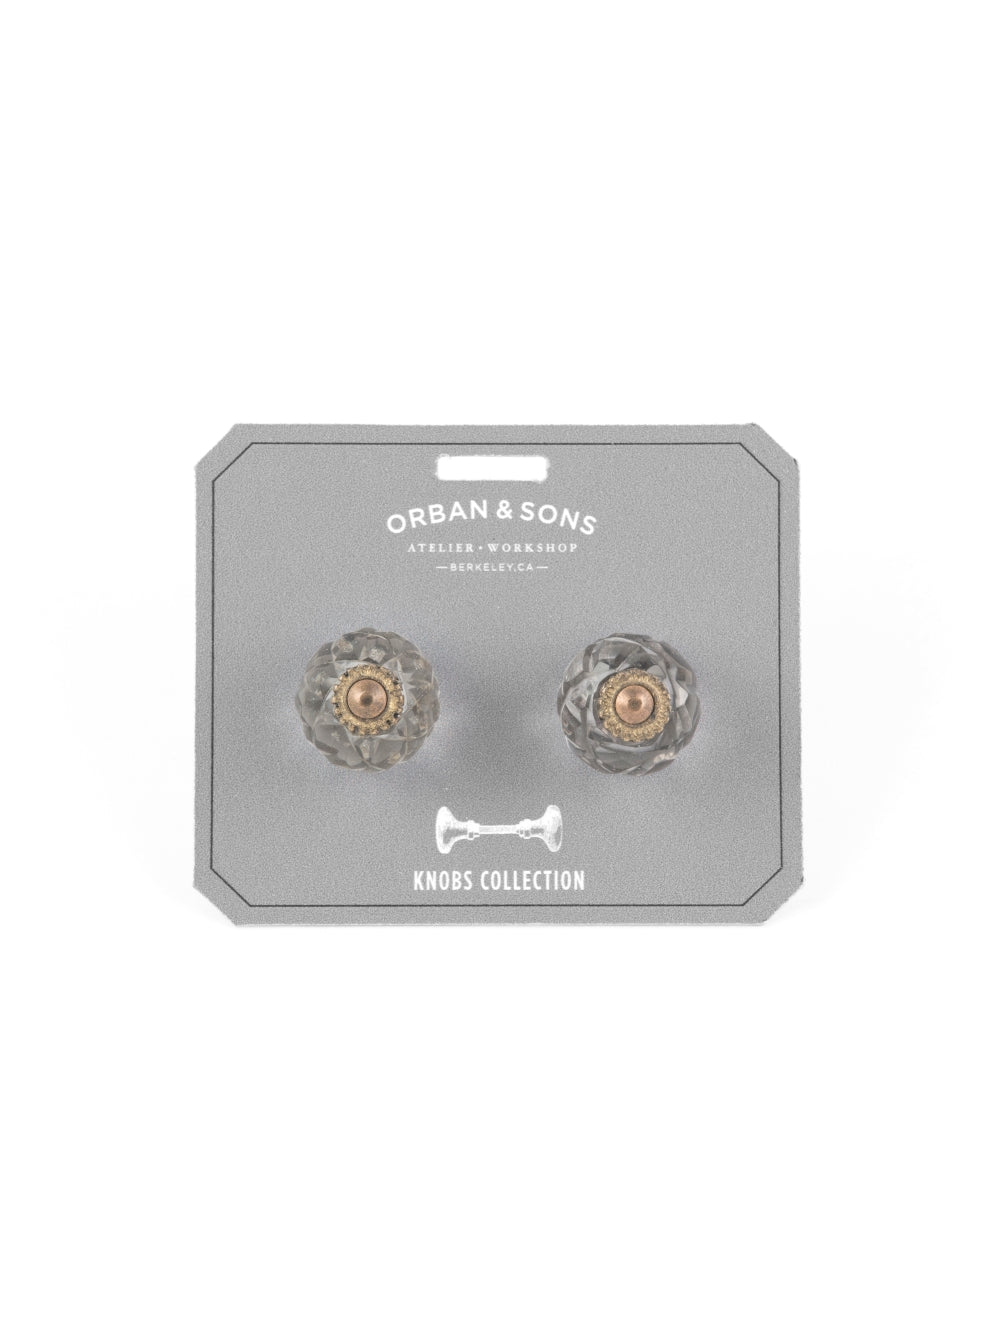 Orban & Sons Decorative Drawer Knobs Style #11 (Diameter 1.18") Cabinet Knobs & Handles Orban & Sons Brand_Orban & Sons CLEAN OUT SALE Knobs & Pulls Orban & Sons Orban_SonsDecorativeDrawerKnobs_52225cde-4a95-4349-9aa6-e912eb00b783